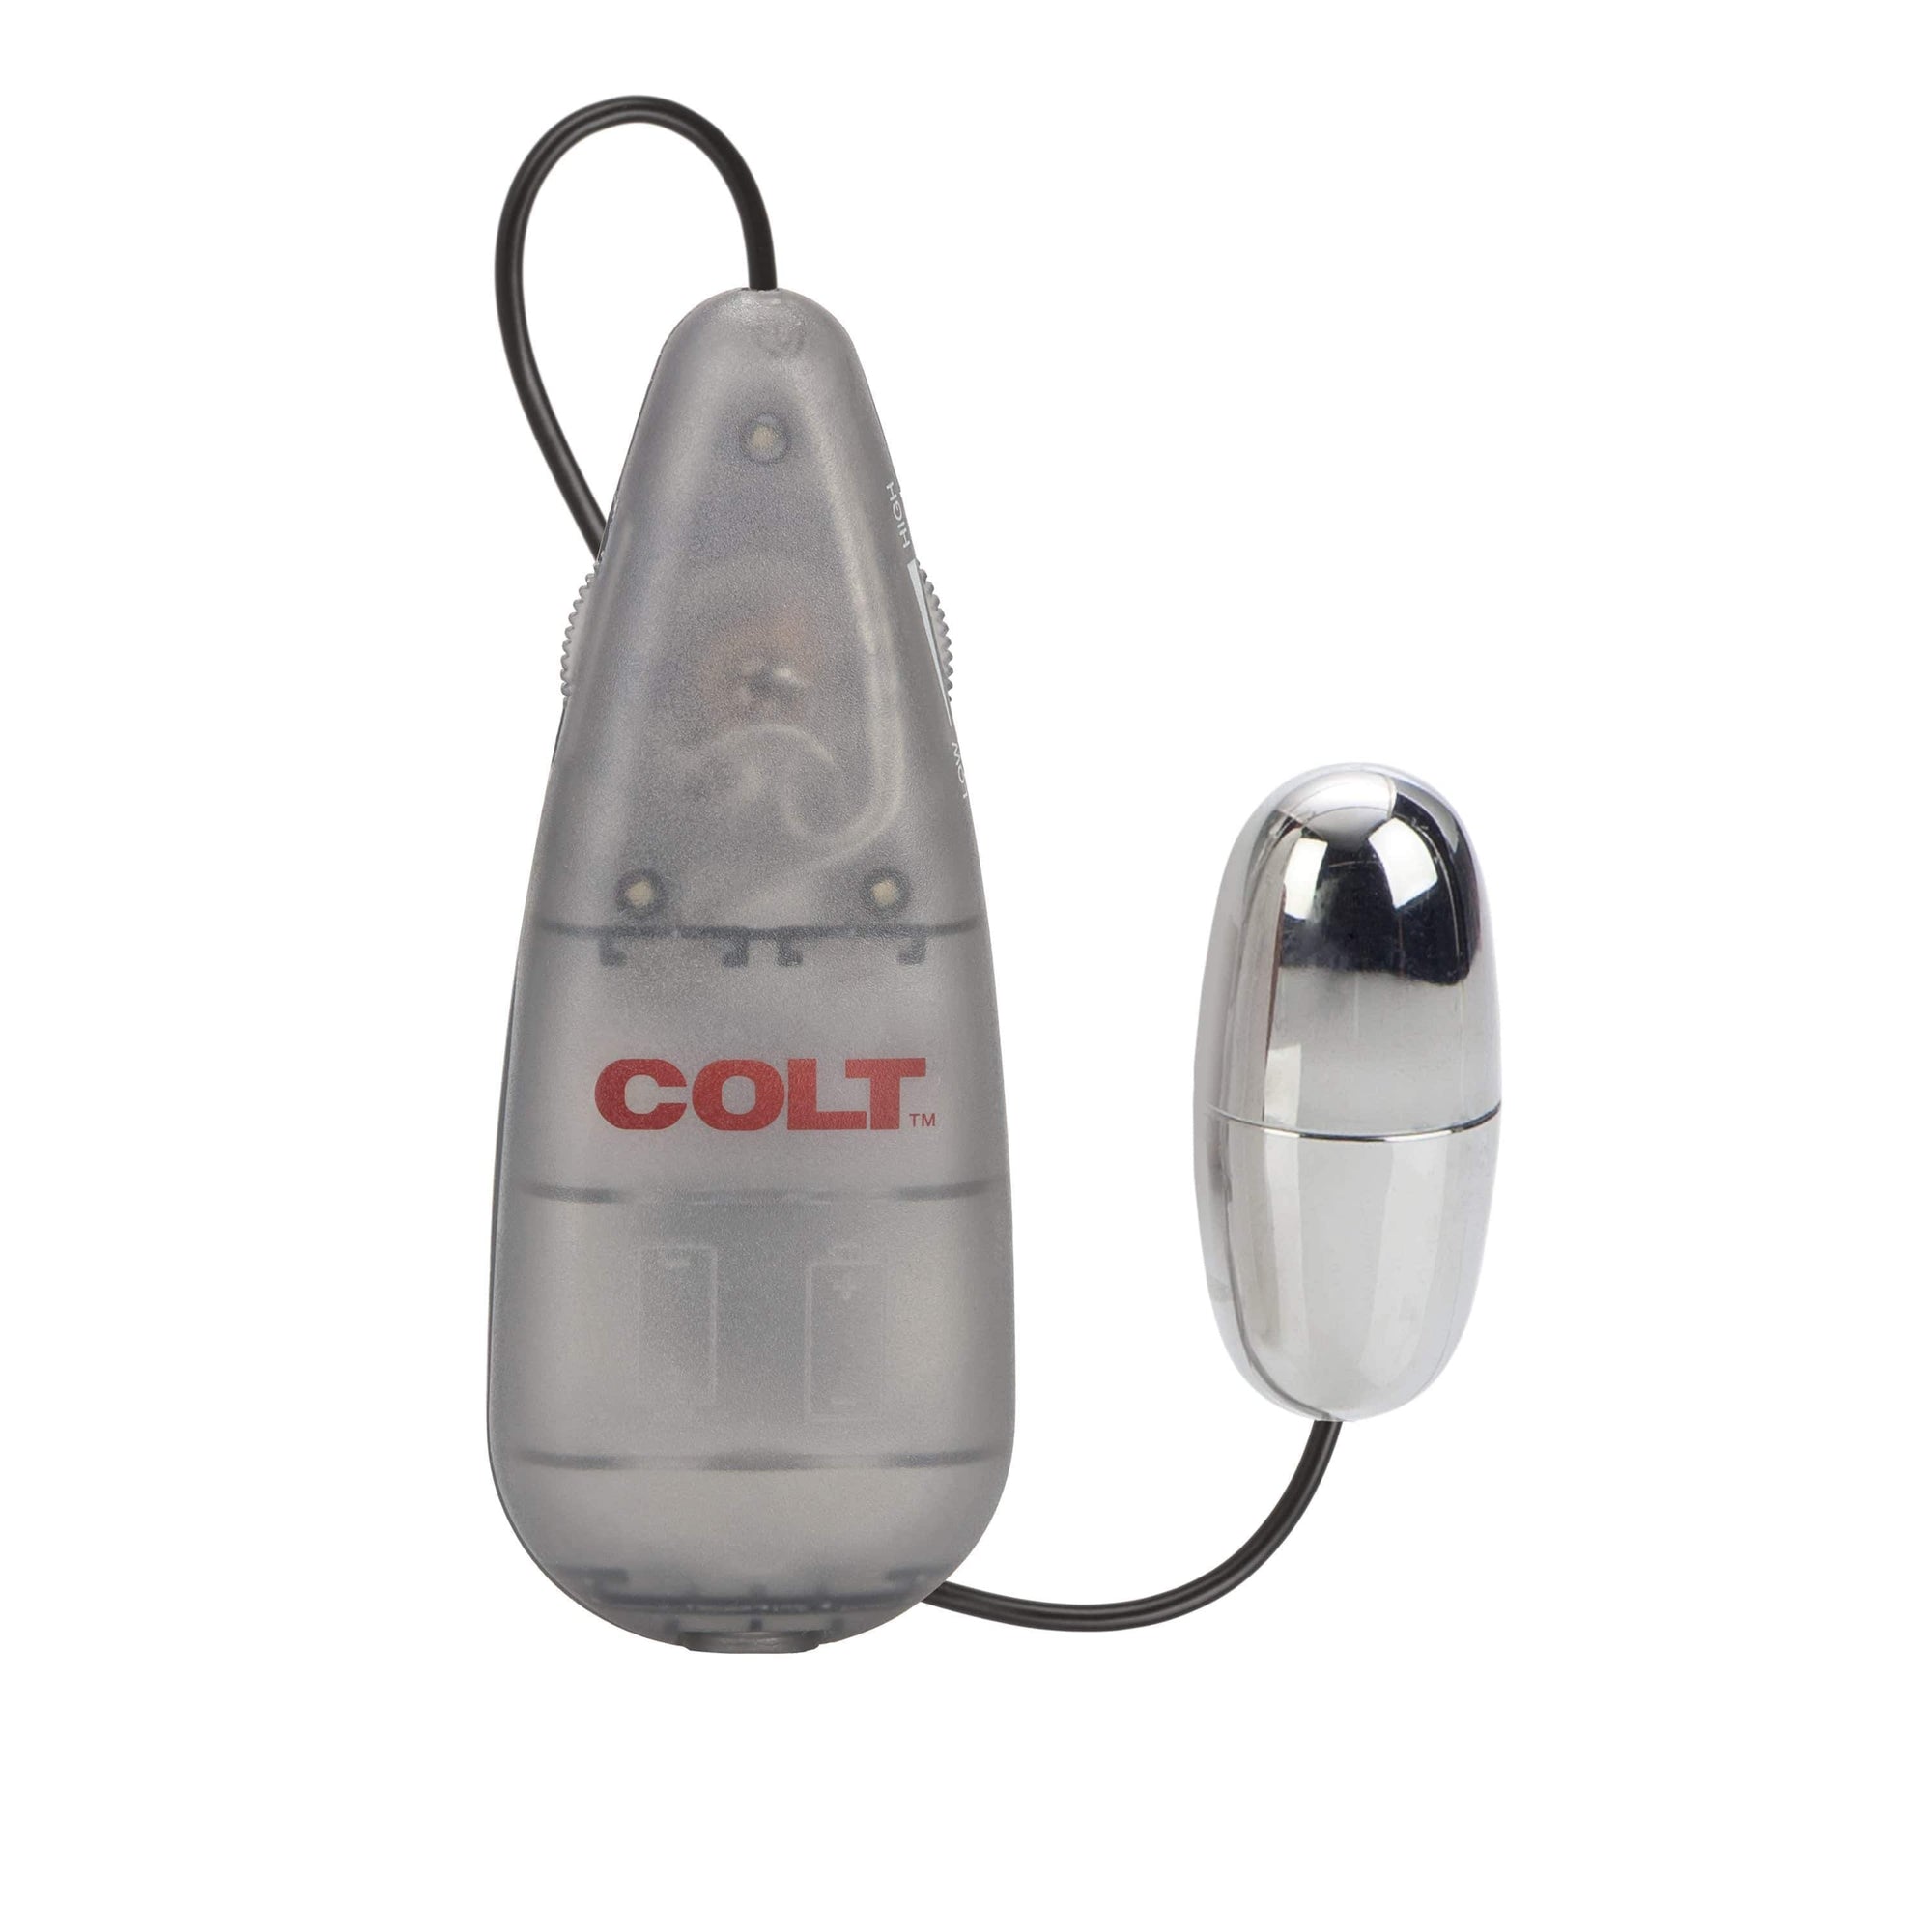 California Exotics - COLT Multi Speed Power Pak Bullet with Remote (Silver) -  Wired Remote Control Egg (Vibration) Non Rechargeable  Durio.sg